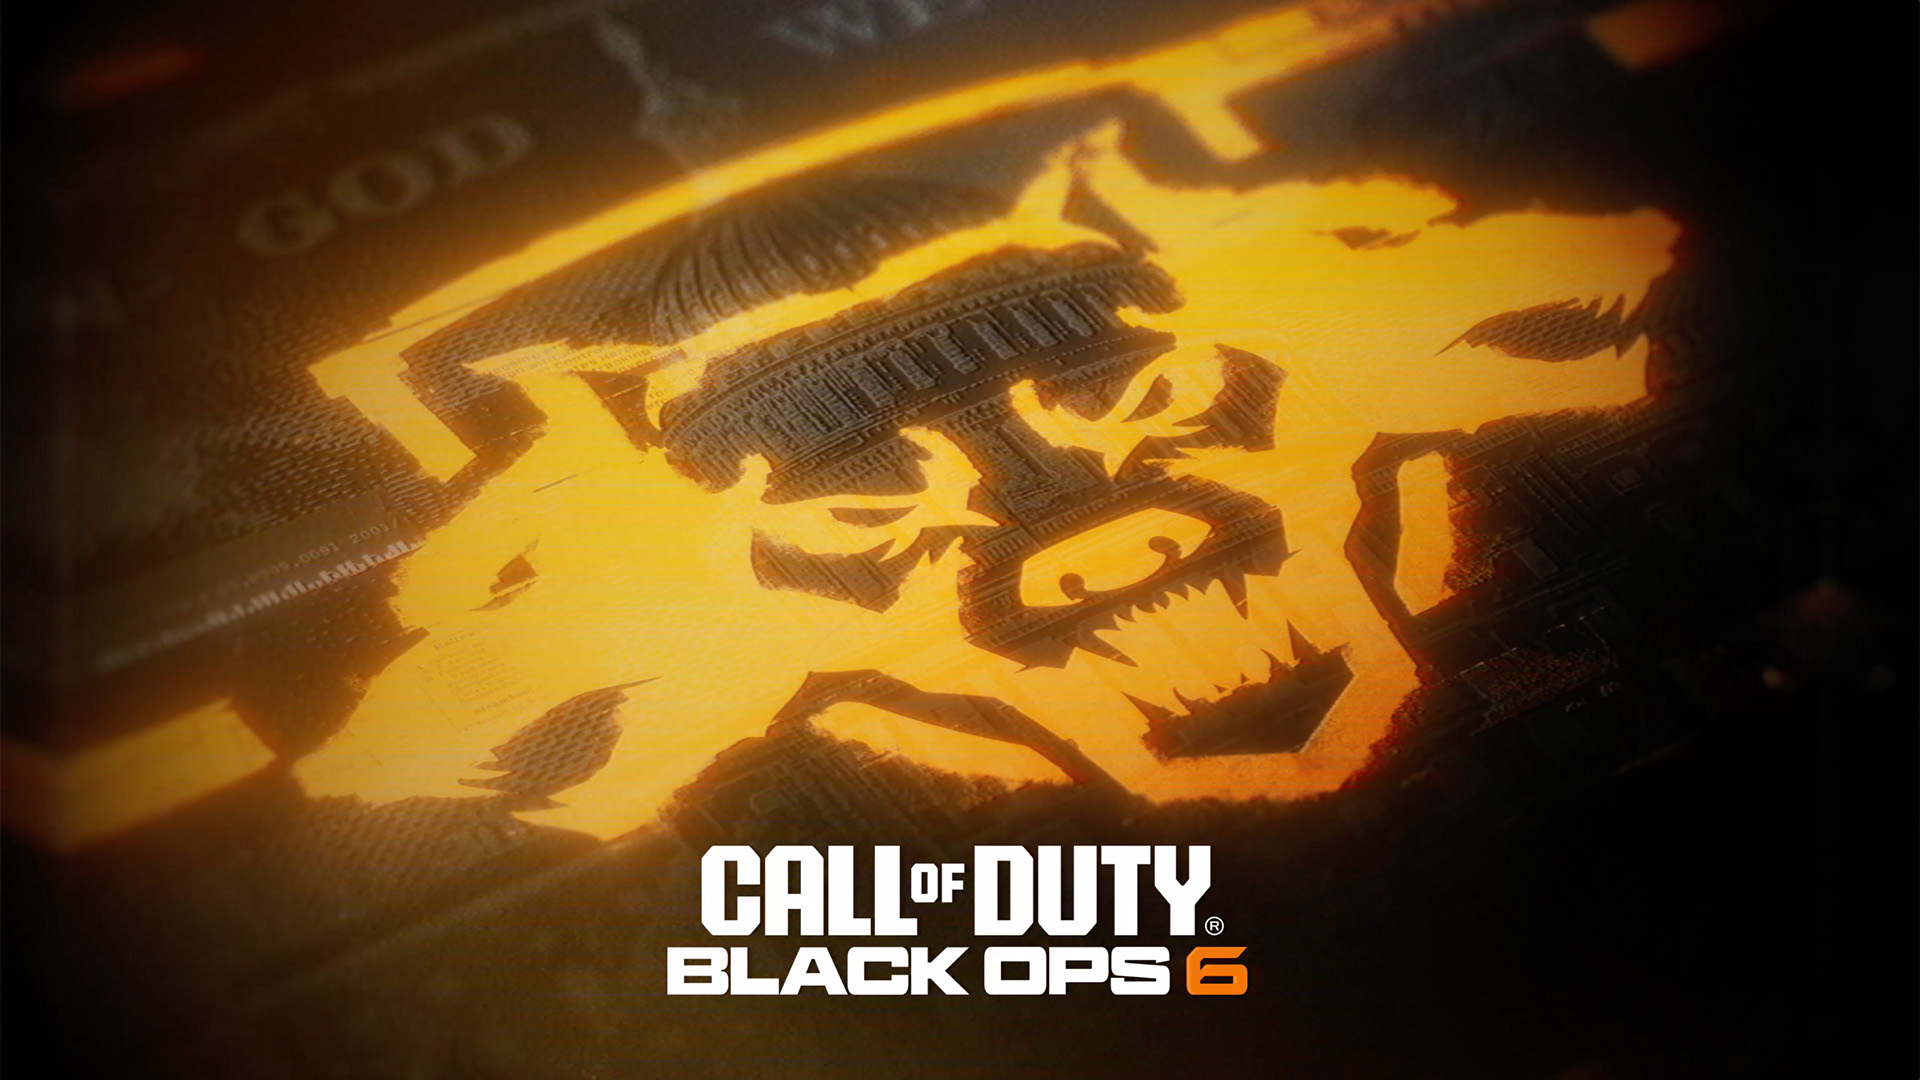 Call of Duty: Black Ops 6 will make its full reveal on June 9 at 10:00am Pacific